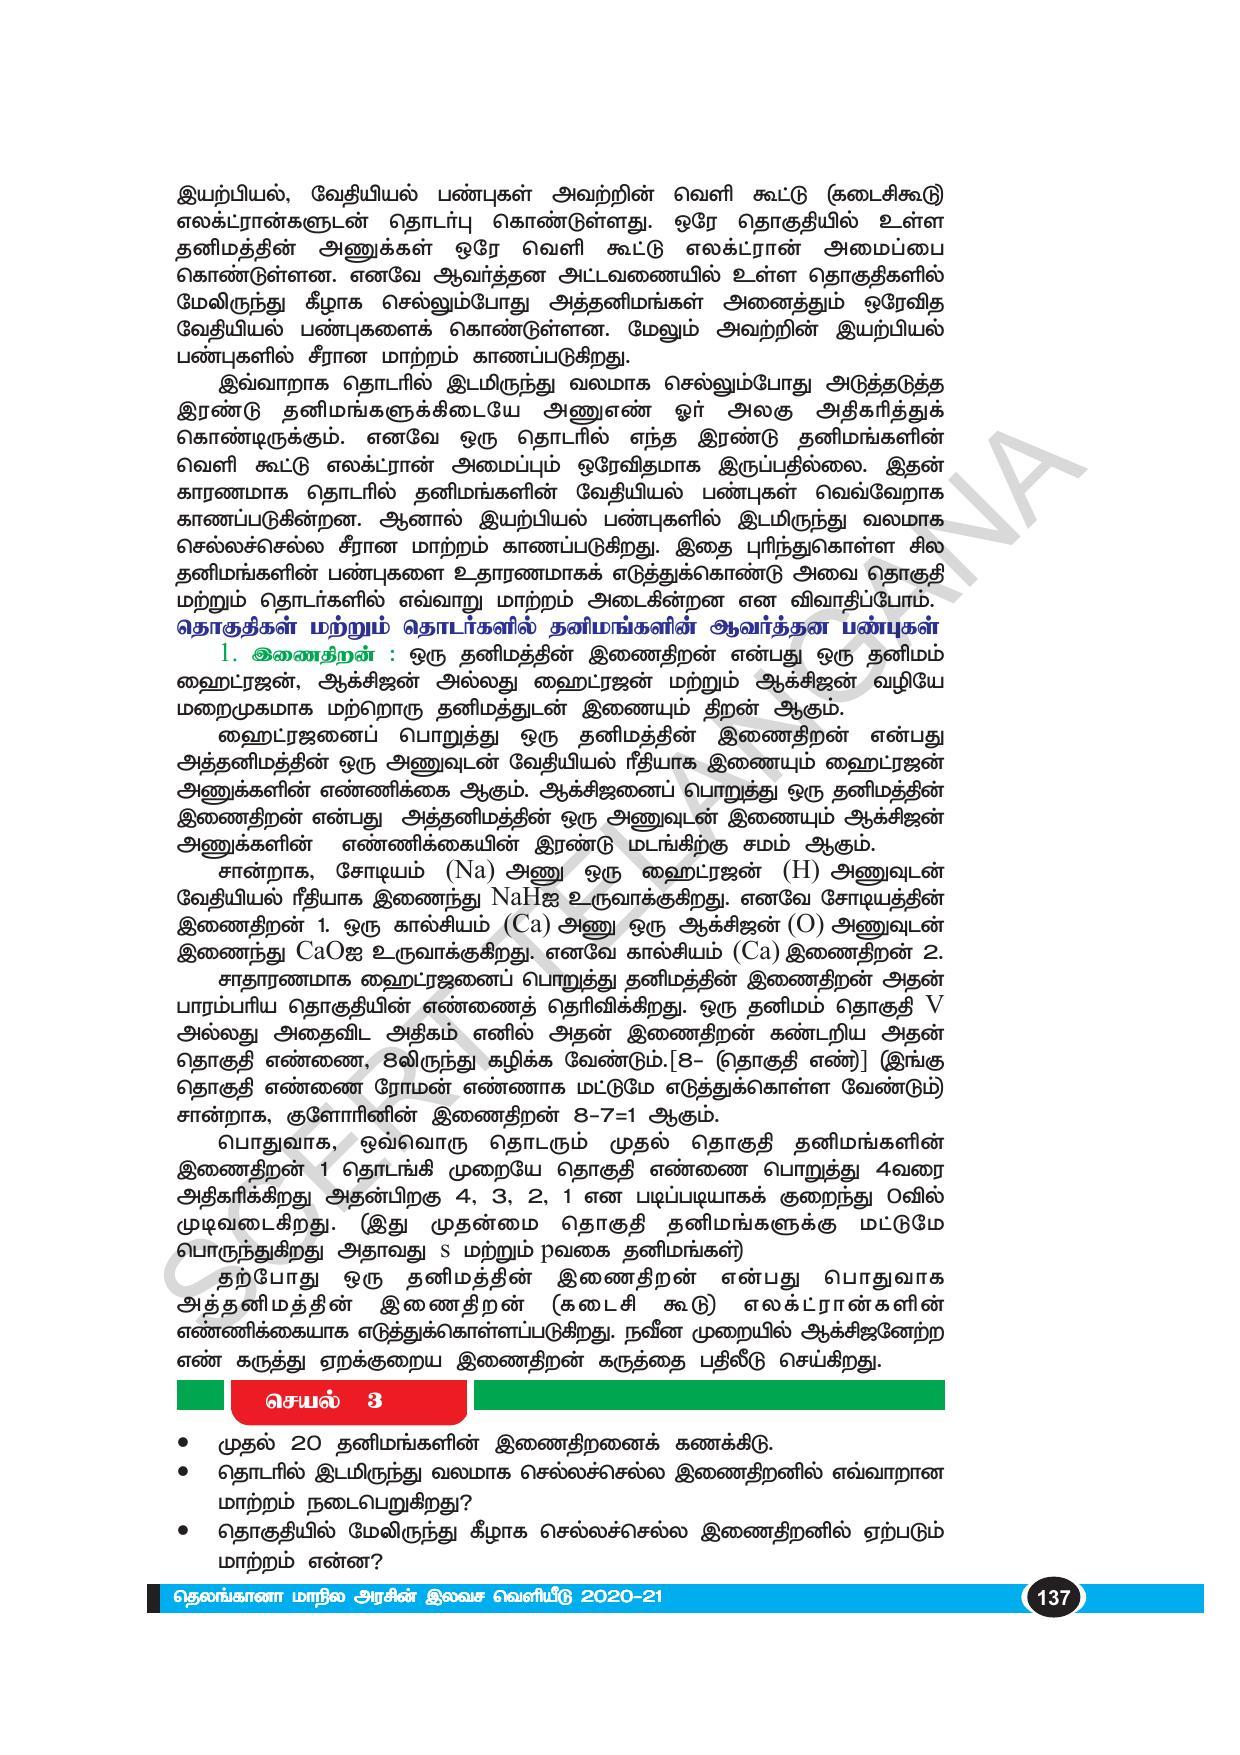 TS SCERT Class 10 Physical Science(Tamil Medium) Text Book - Page 149